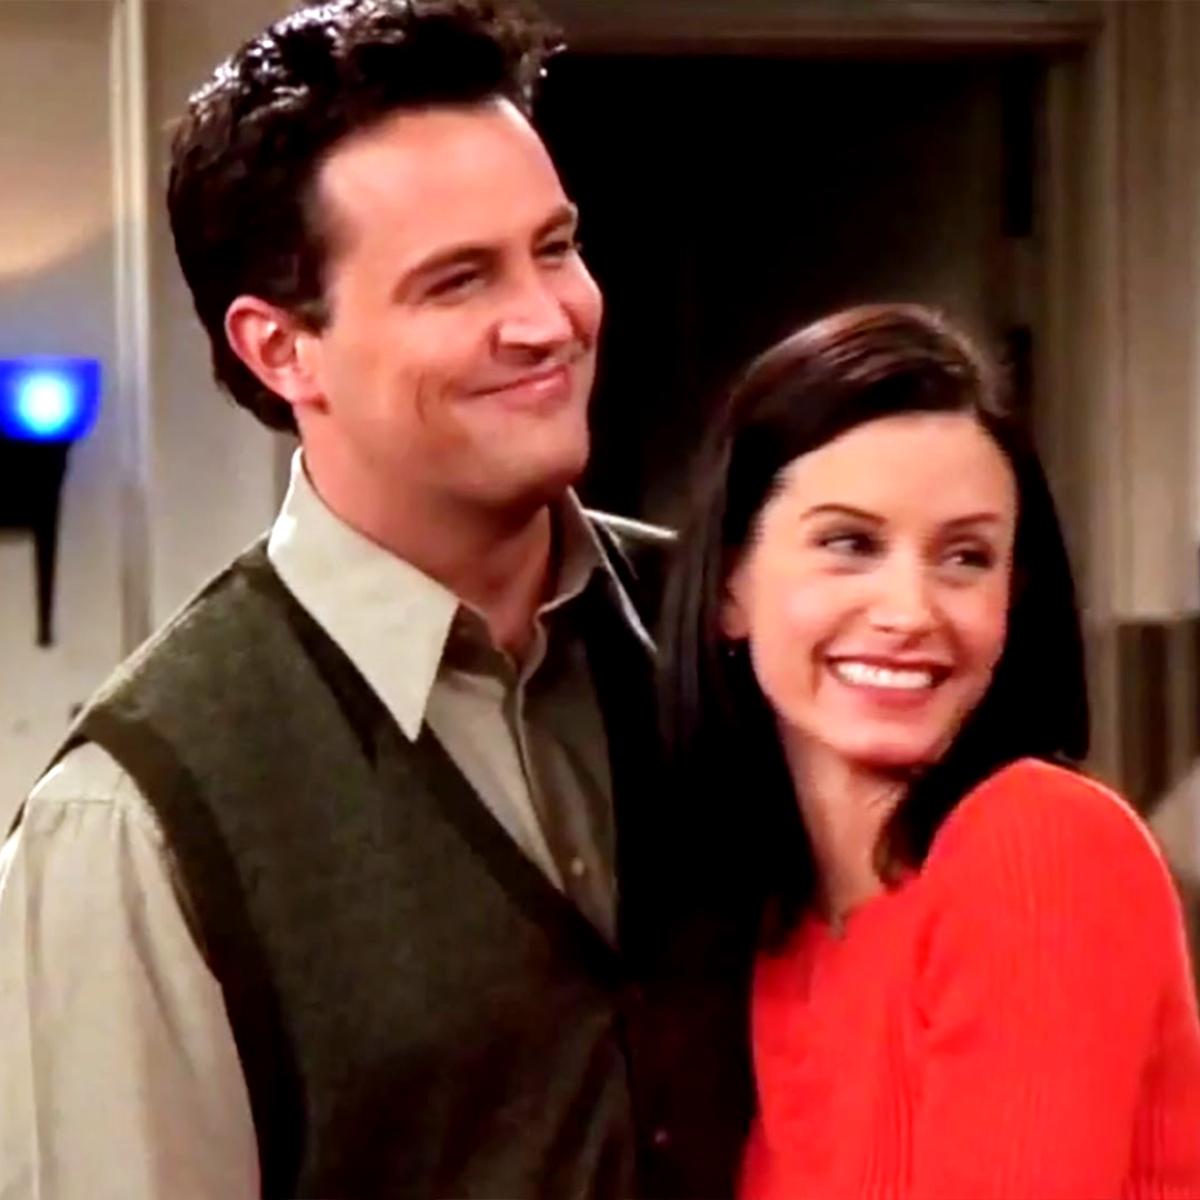 chandler and monica